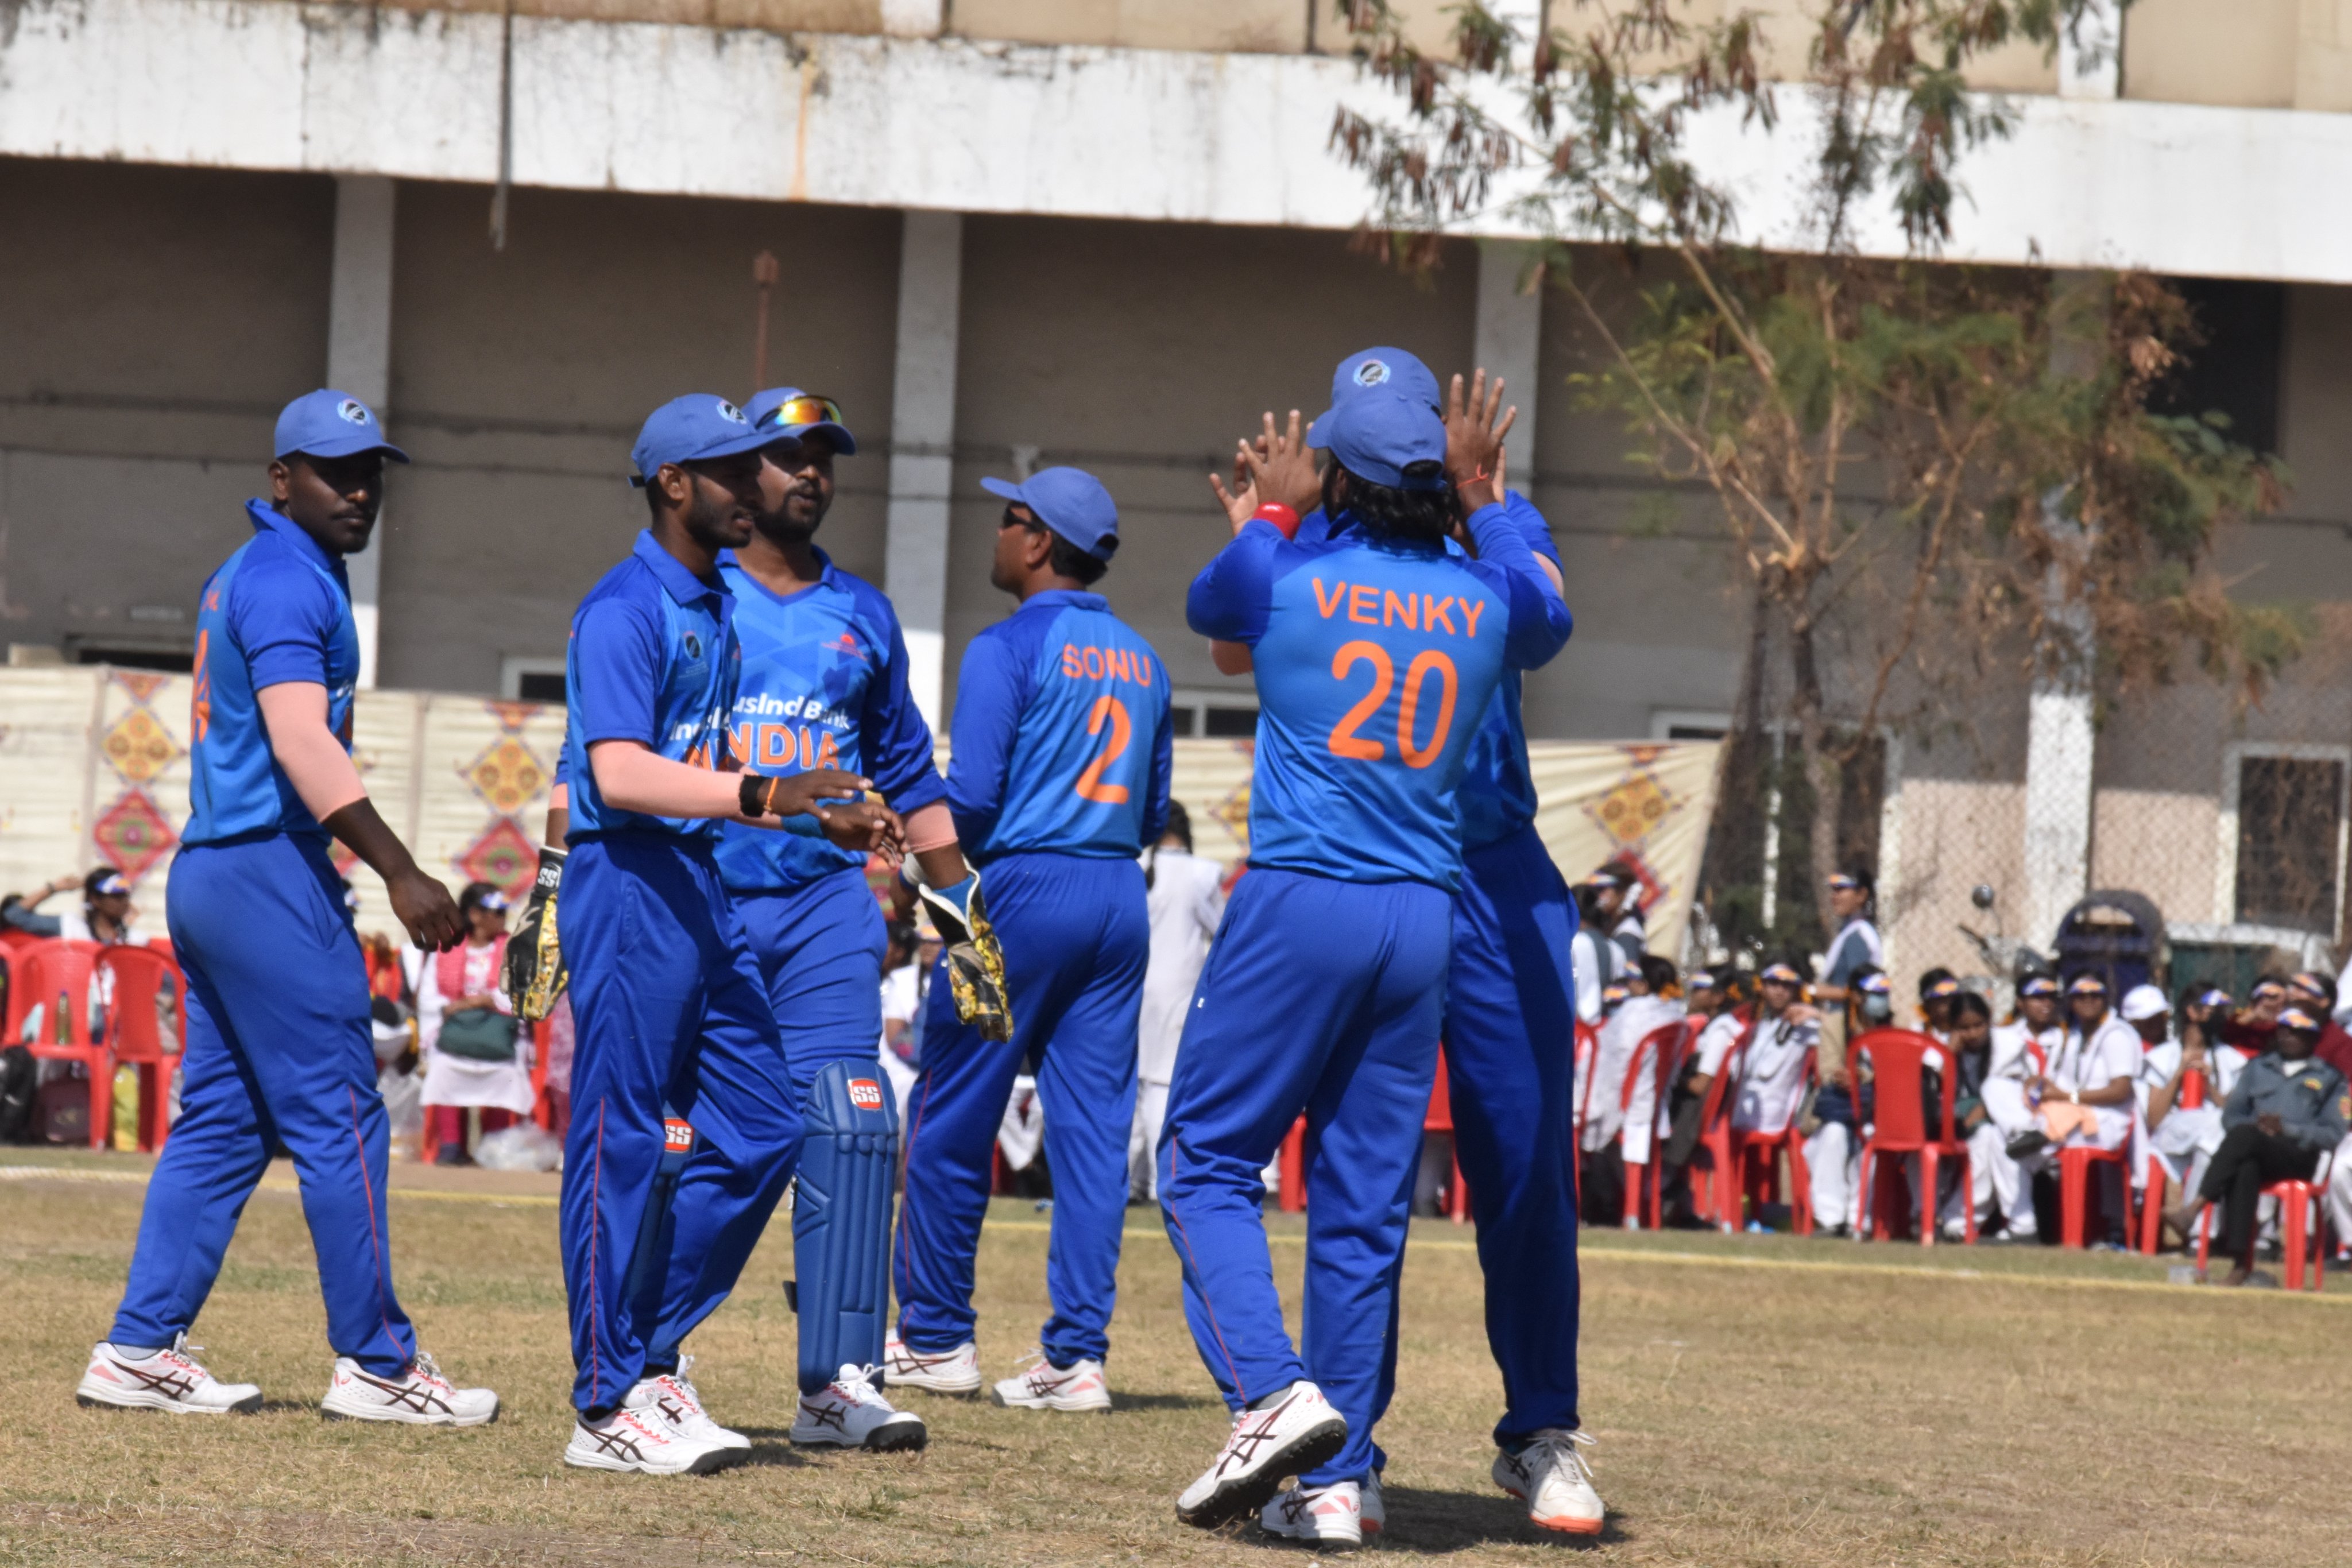 India creates history as they clinch third T20 World Cup in Blind Cricket as they beat Bangladesh by 120 runs